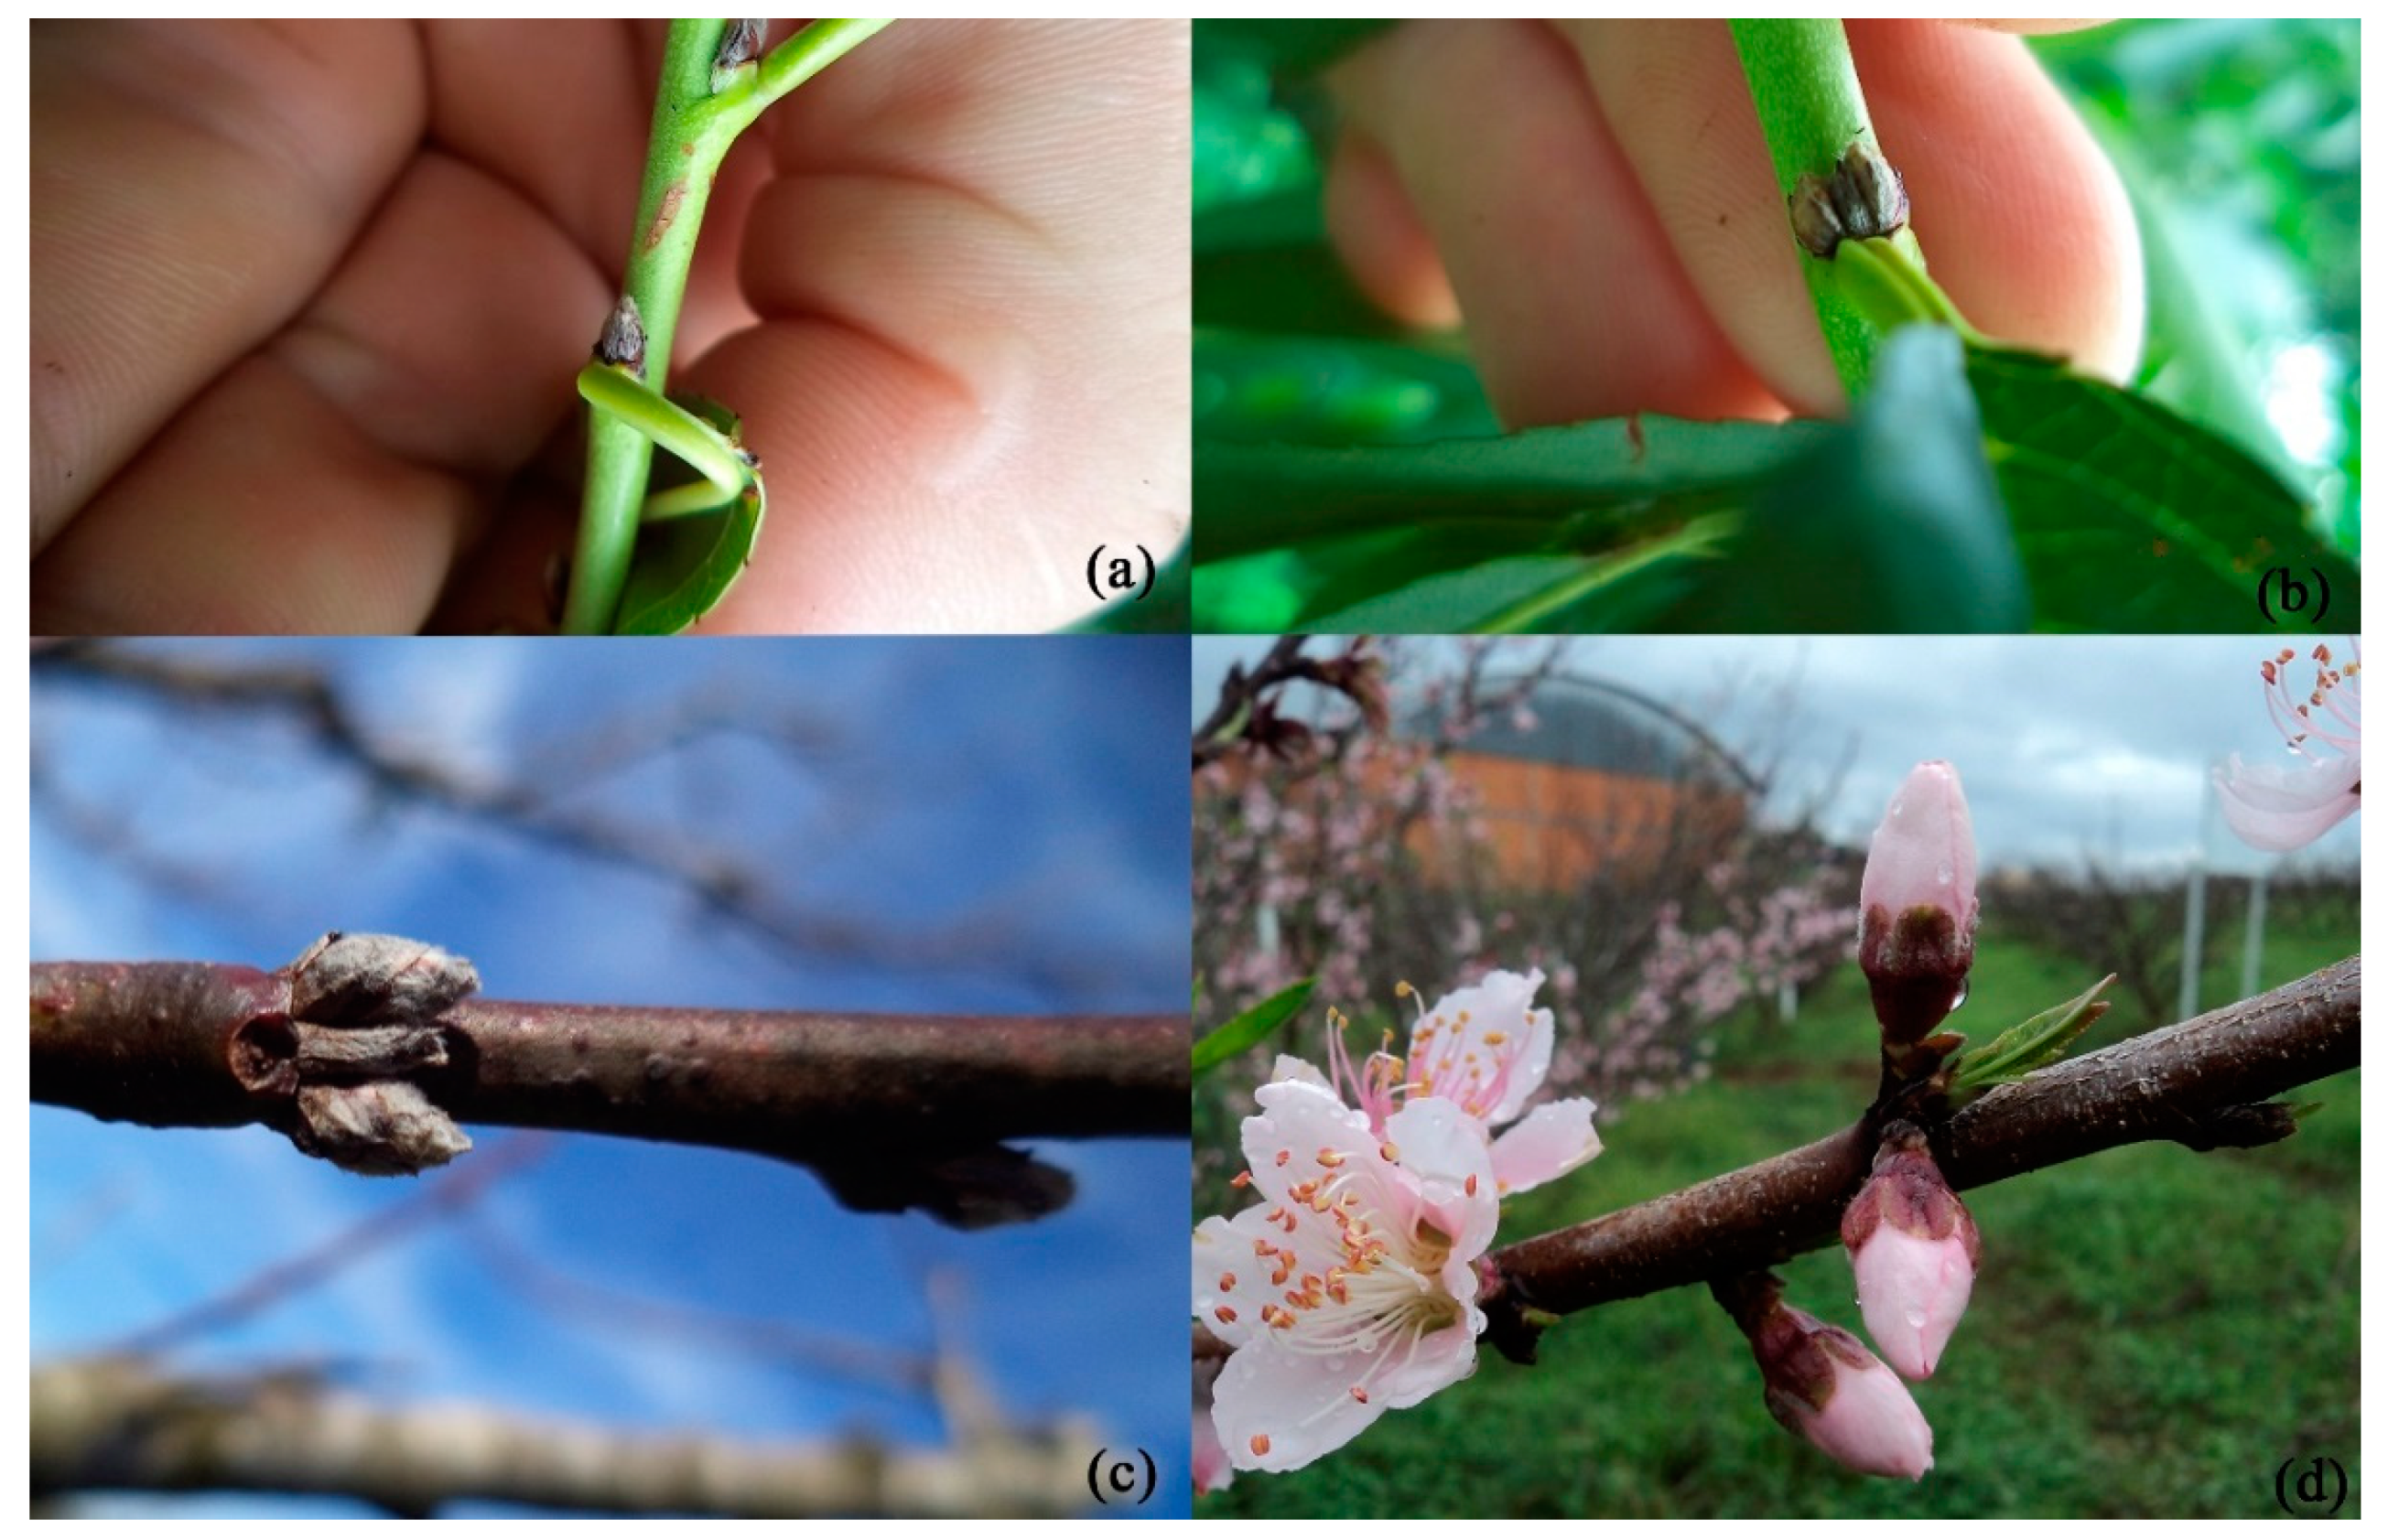 Agronomy | Free Full-Text | Development of Peach Flower Buds under Low  Winter Chilling Conditions